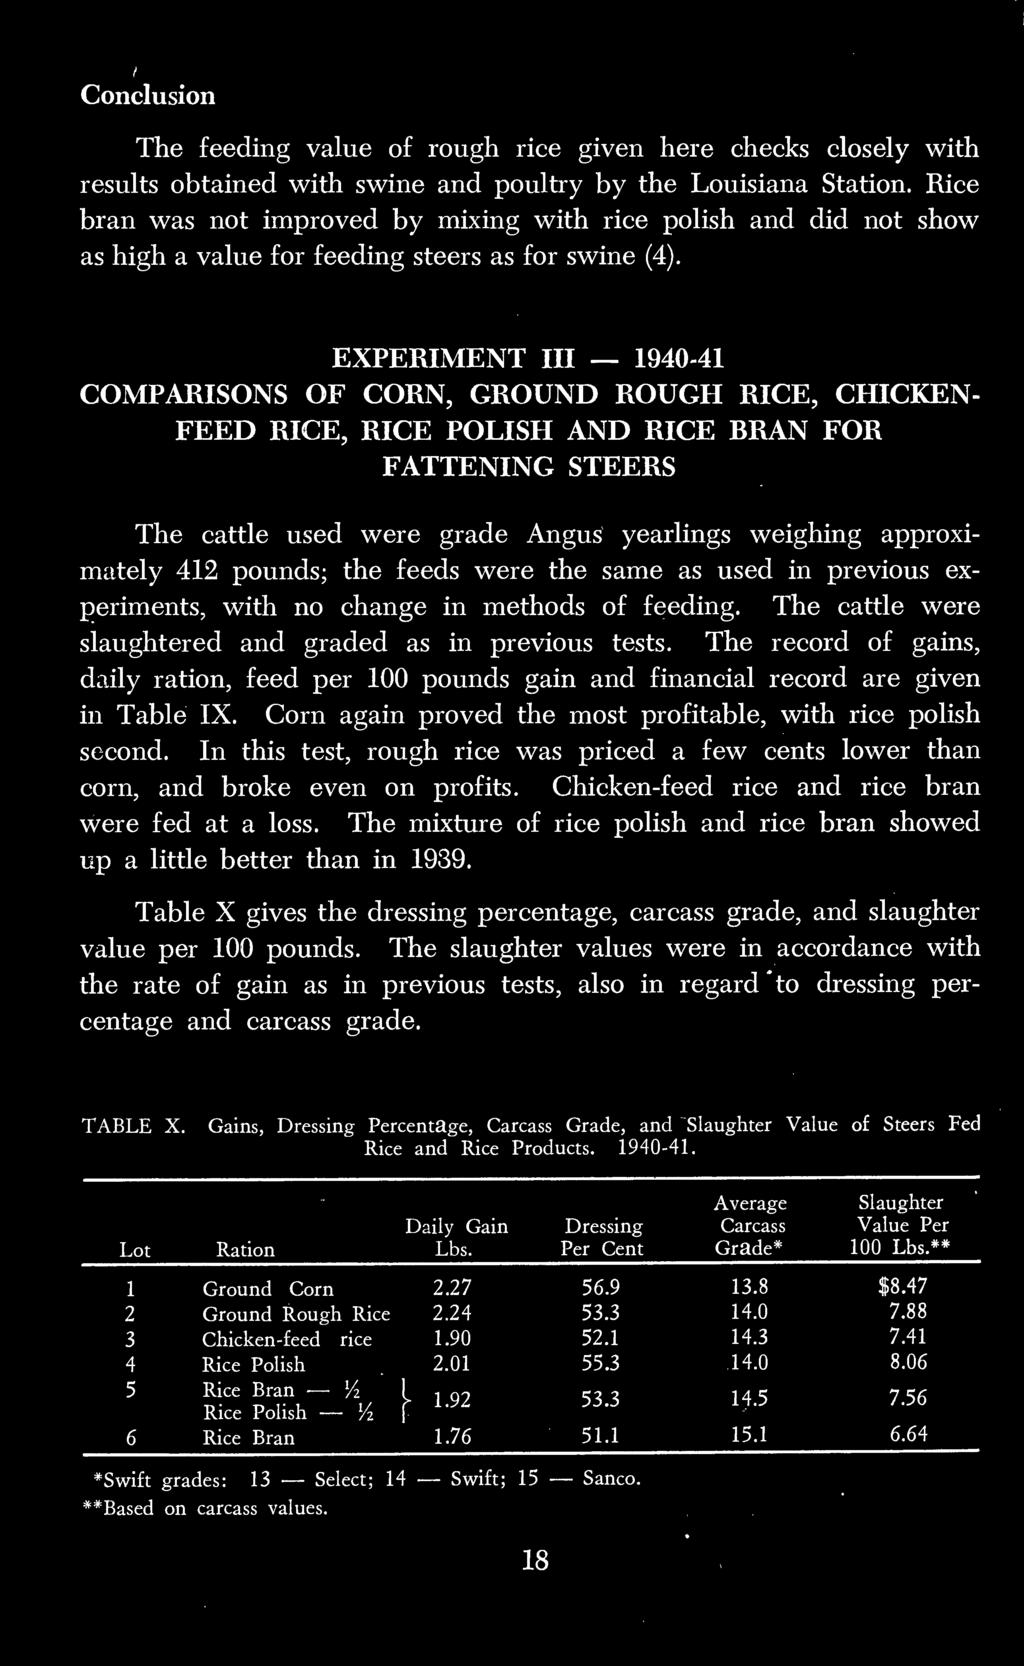 EXPERIMENT III 1940-41 COMPARISONS OF CORN, GROUND ROUGH RICE, CHICKEN- FEED RICE, RICE POLISH AND RICE BRAN FOR FATTENING STEERS The cattle used were grade Angus yearlings weighing apprximately 412